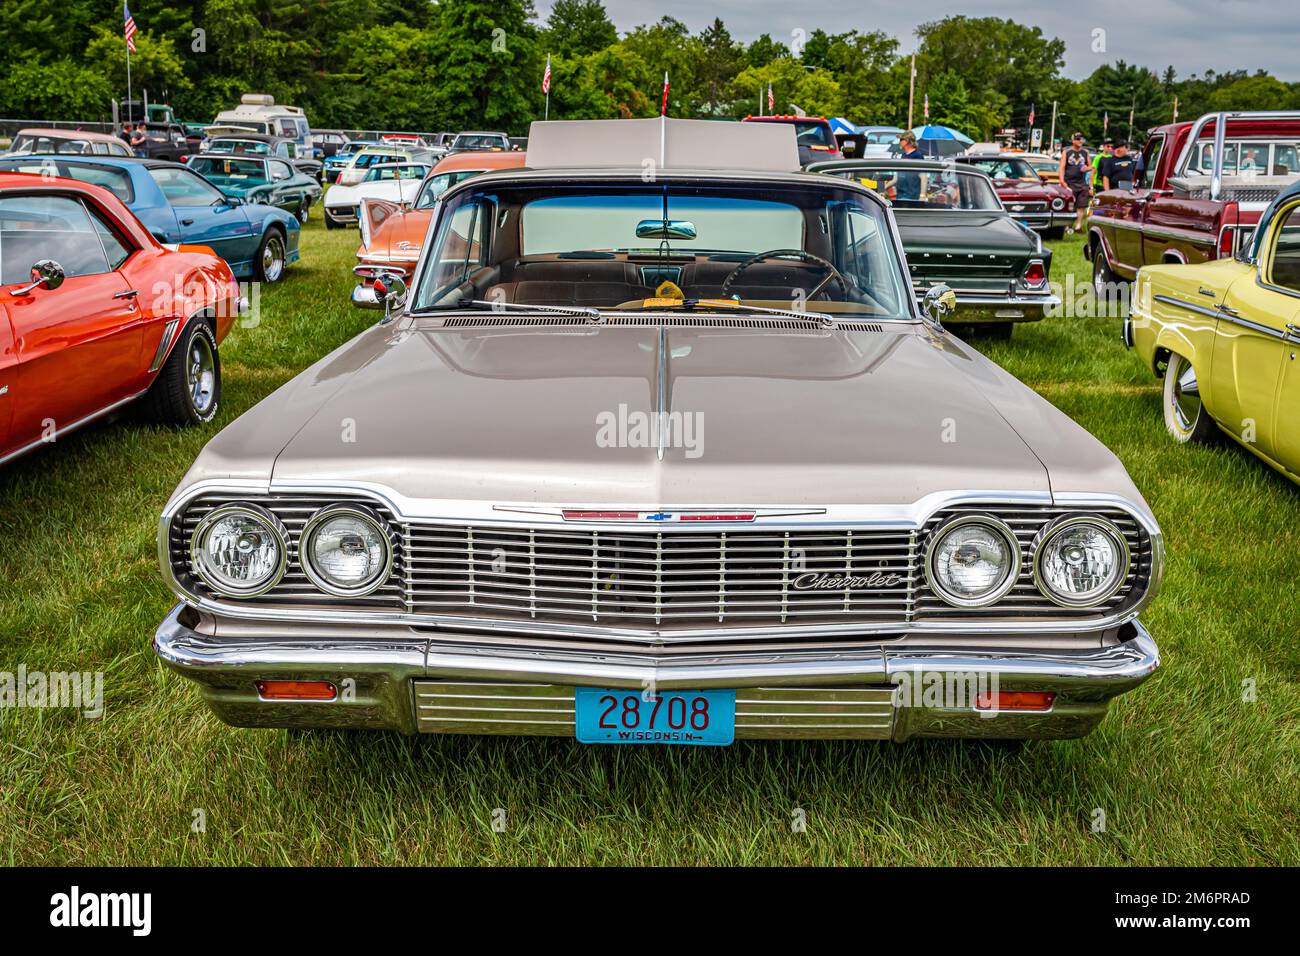 Iola, WI - July 07, 2022: High perspective front view of a 1964 Chevrolet Impala 2 Door Hardtop at a local car show. Stock Photo